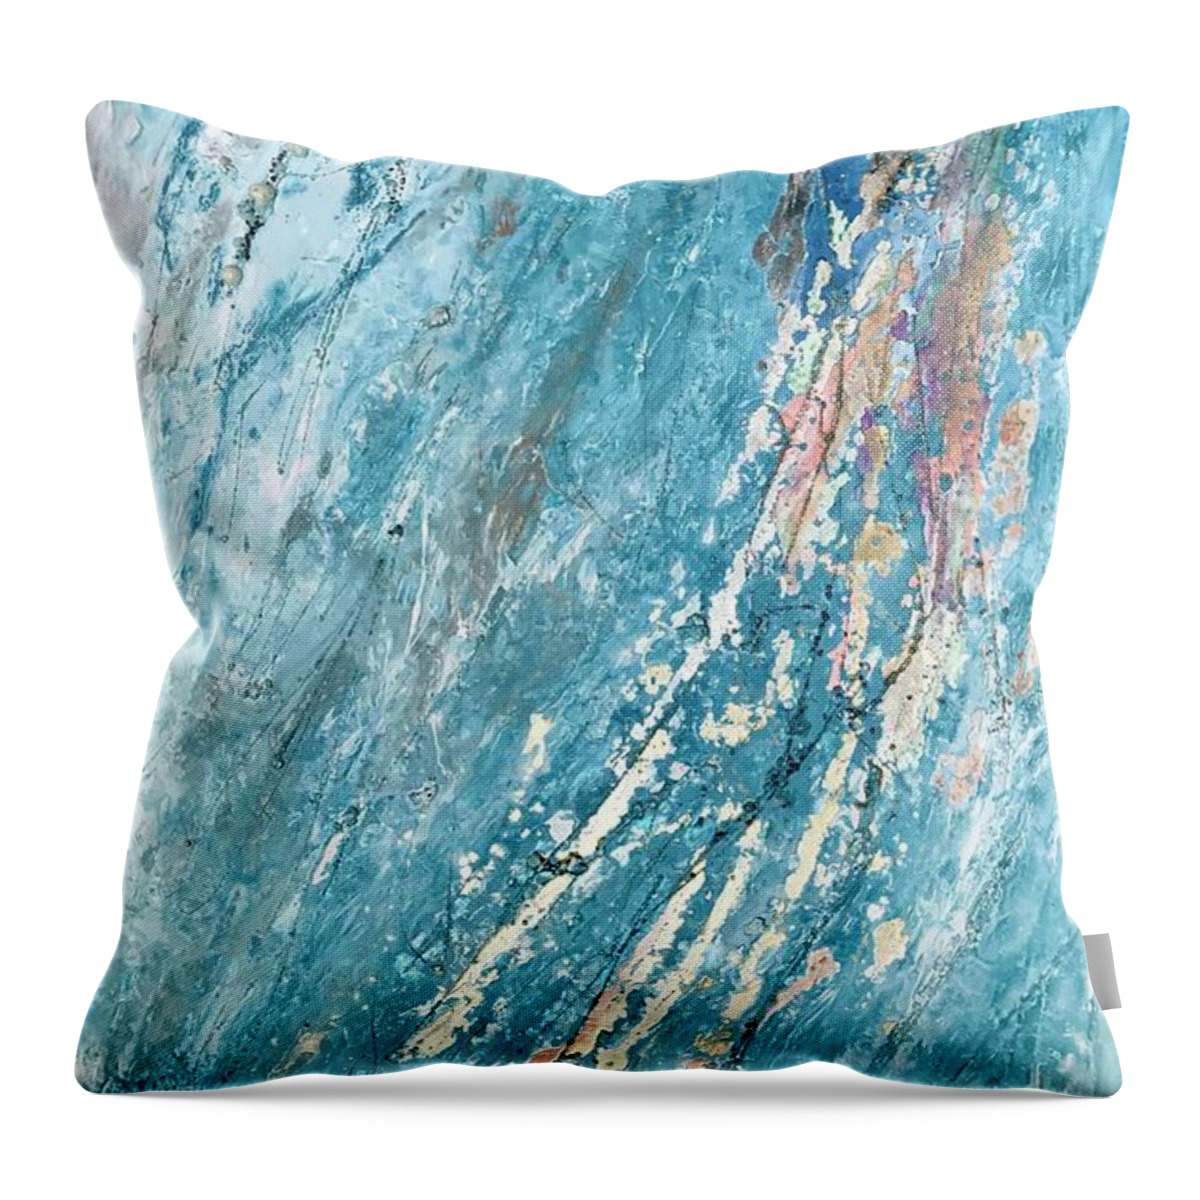 Blue Throw Pillow featuring the mixed media Joy by Shabnam Nassir